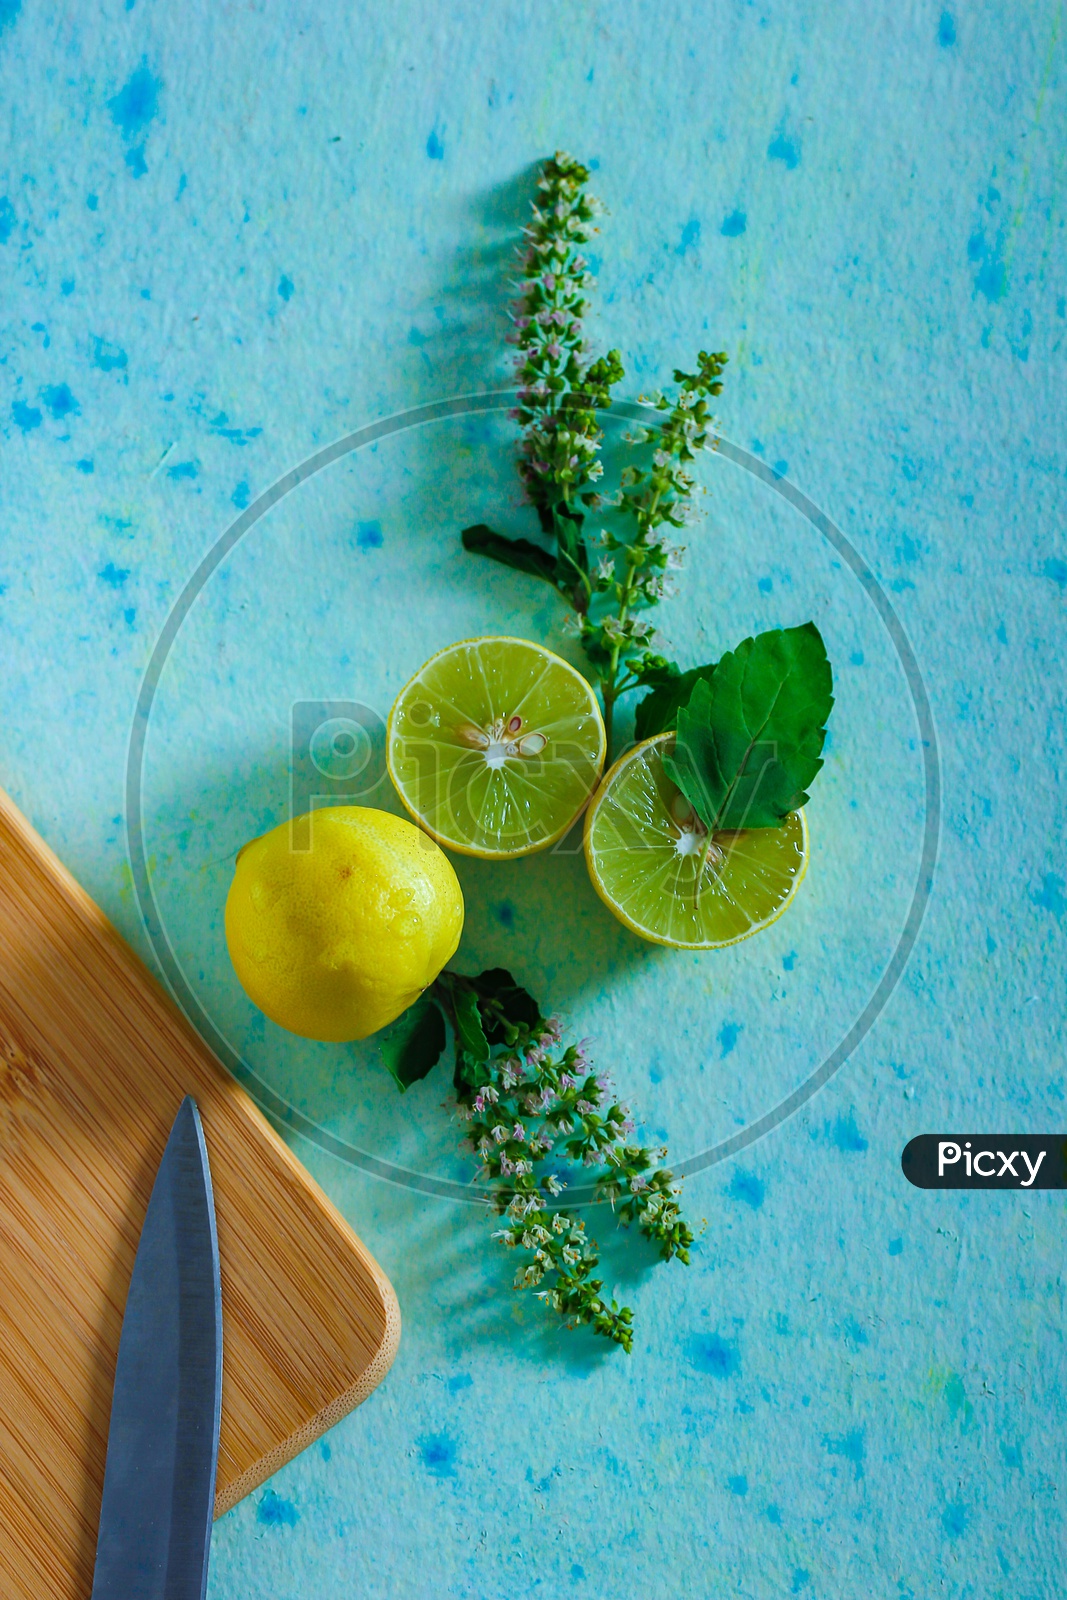 Lemons And Tulsi Leafs On a Wooden  Table For Black Tea